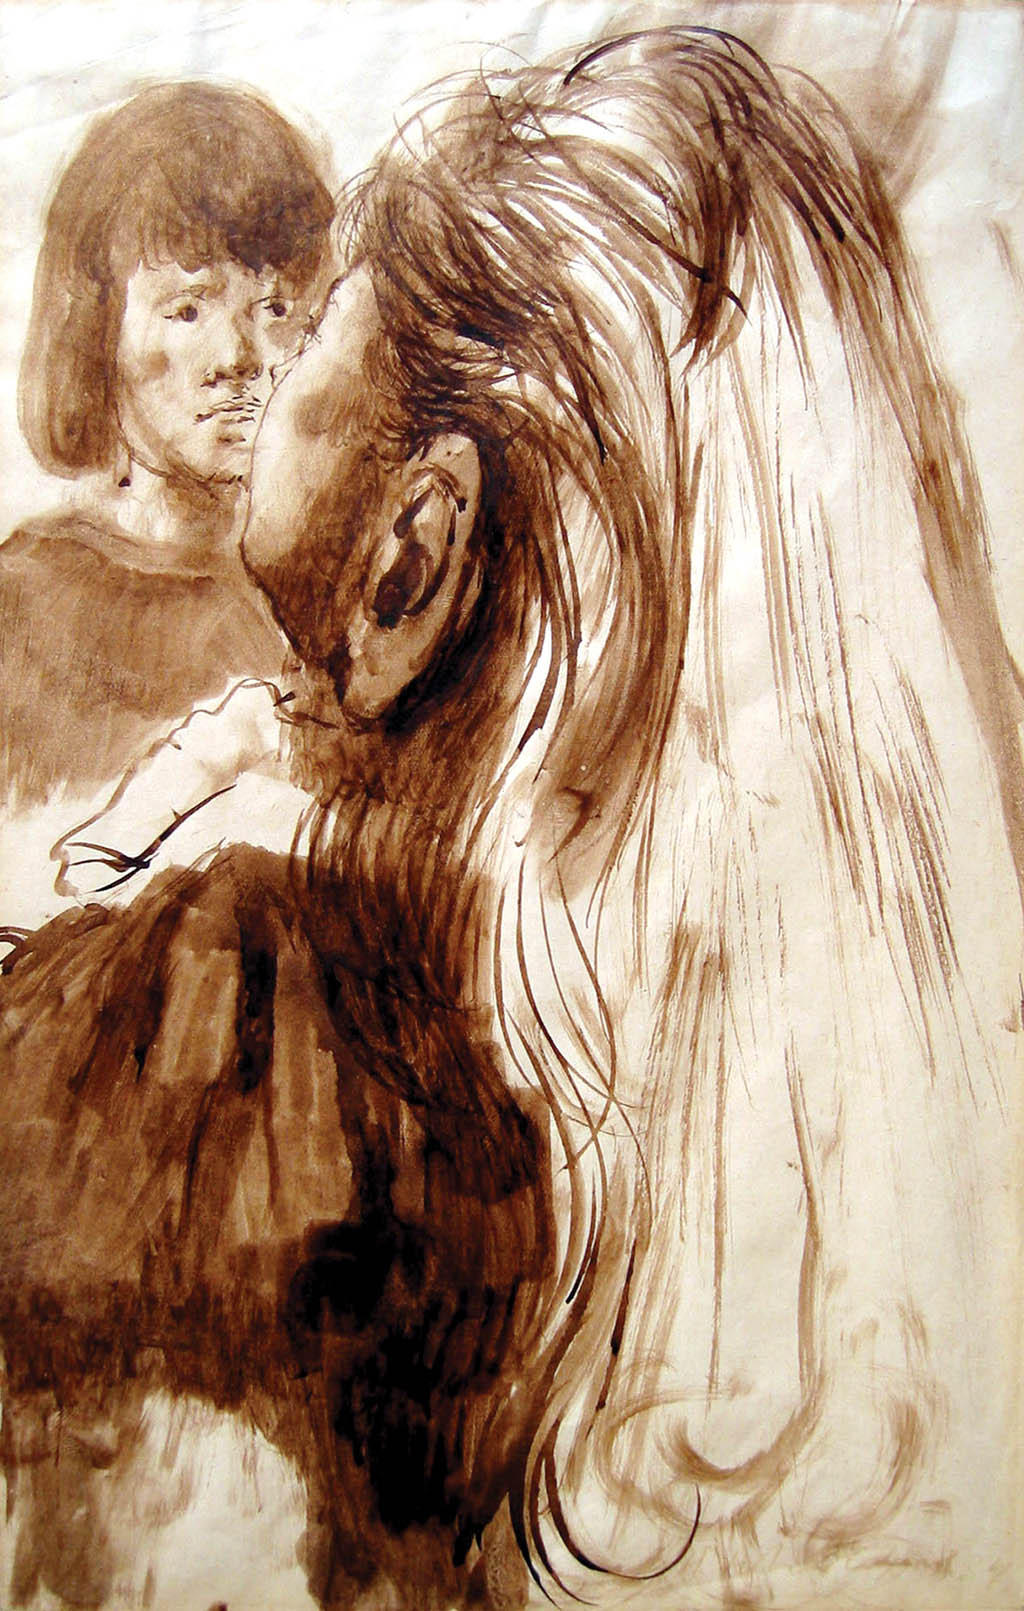 Pavel Tchelitchew - Study for The Tennis Players - 1934 ink and wash on paper